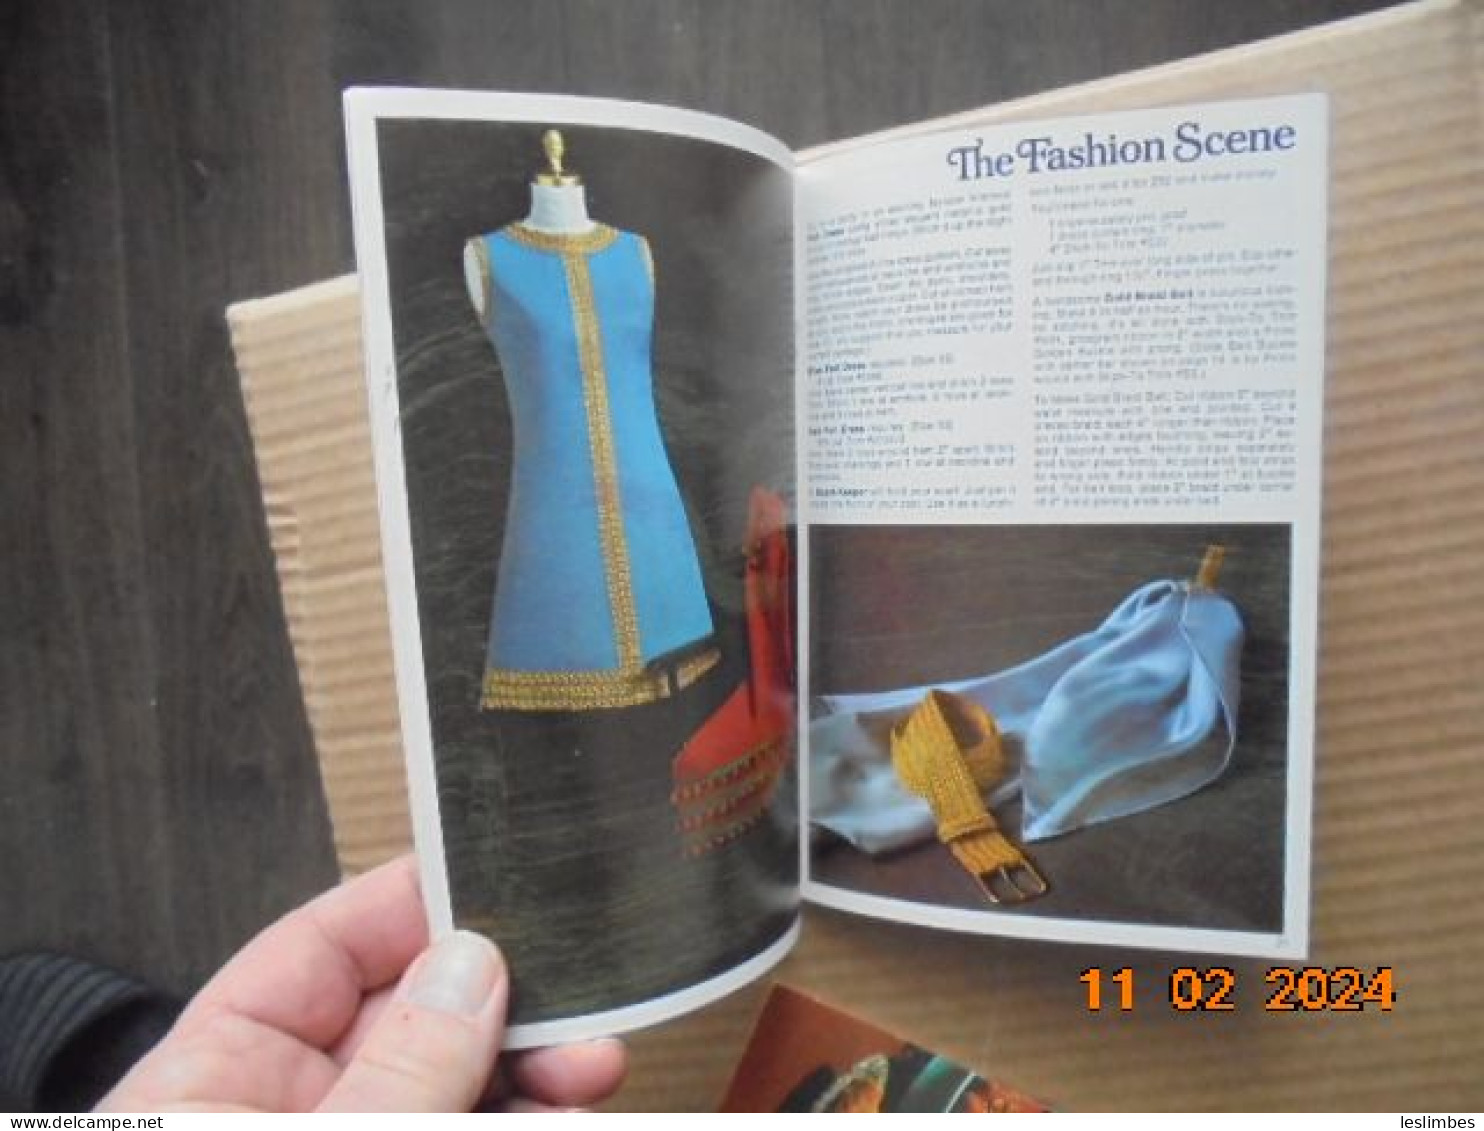 One Hundred Beautiful Ways To Dress Up Christmas: A Step By Step Guide [Wrights 1969] - Crafts